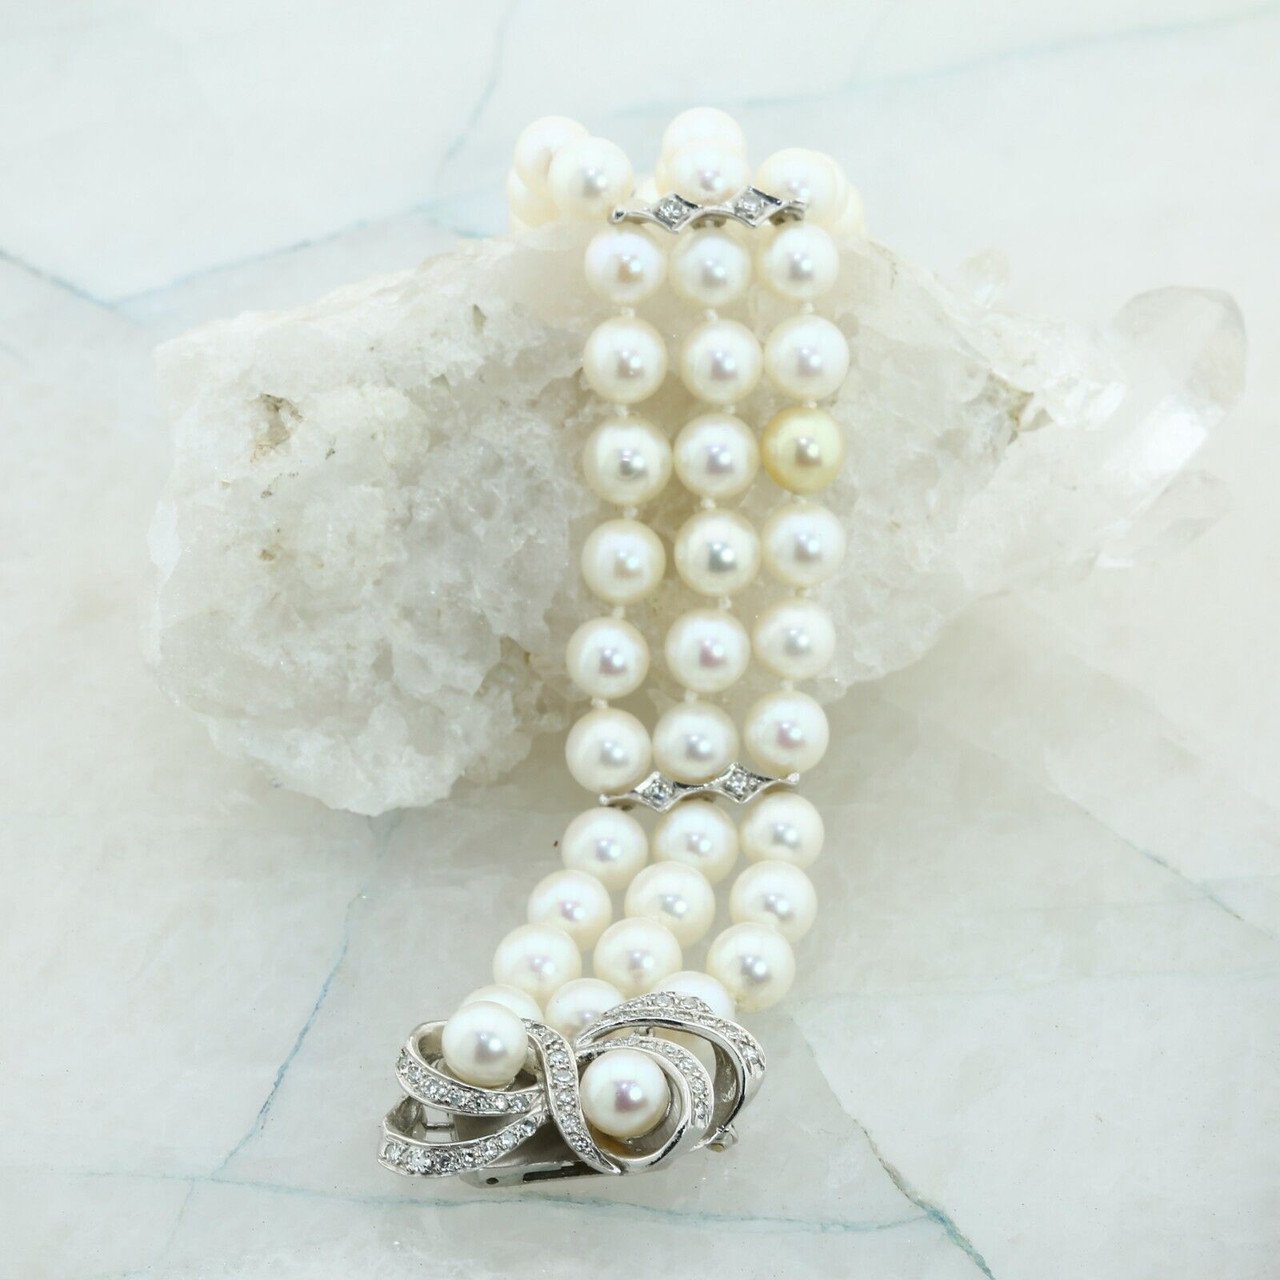 Vintage Richelieu Pearl Necklace With Sterling Clasp - Etsy